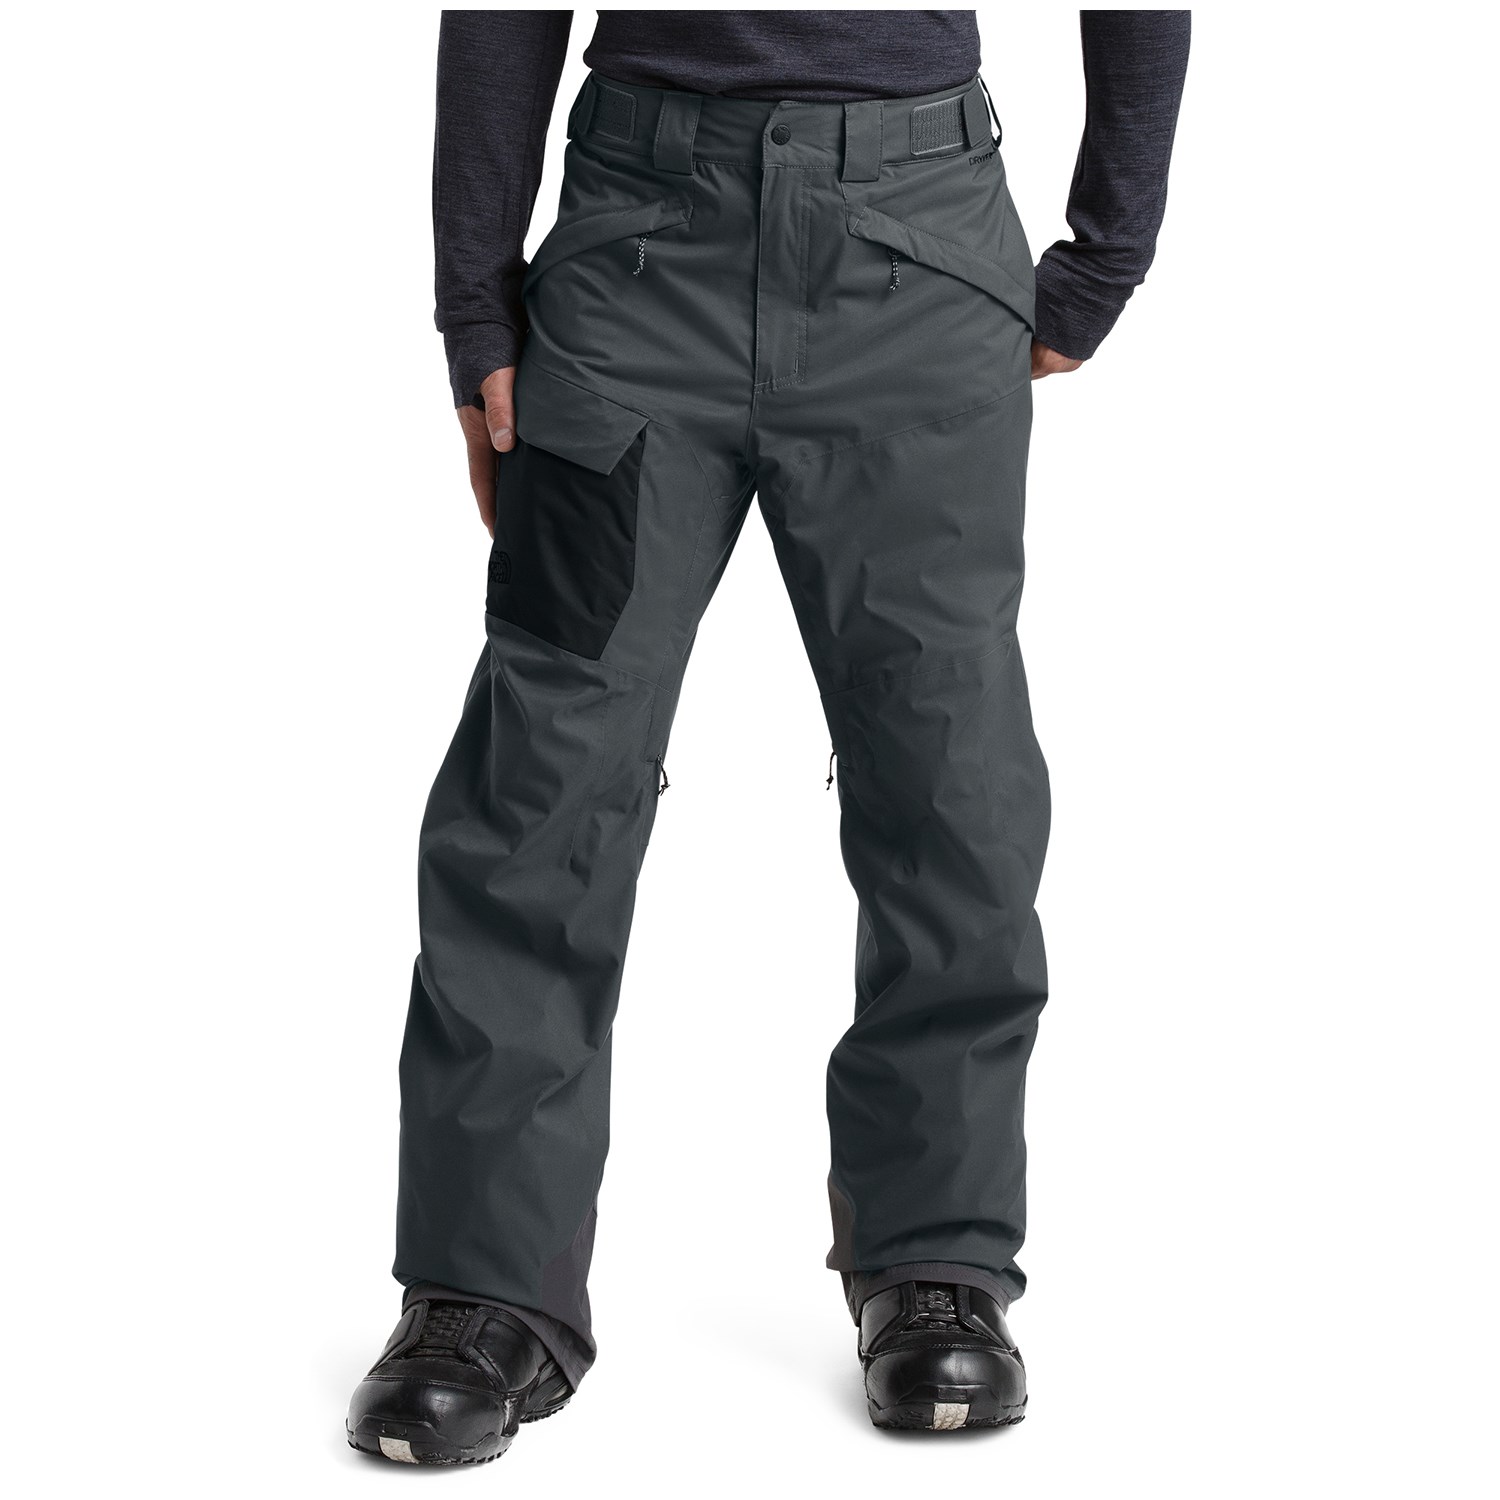 North Face Freedom Pants Size Chart